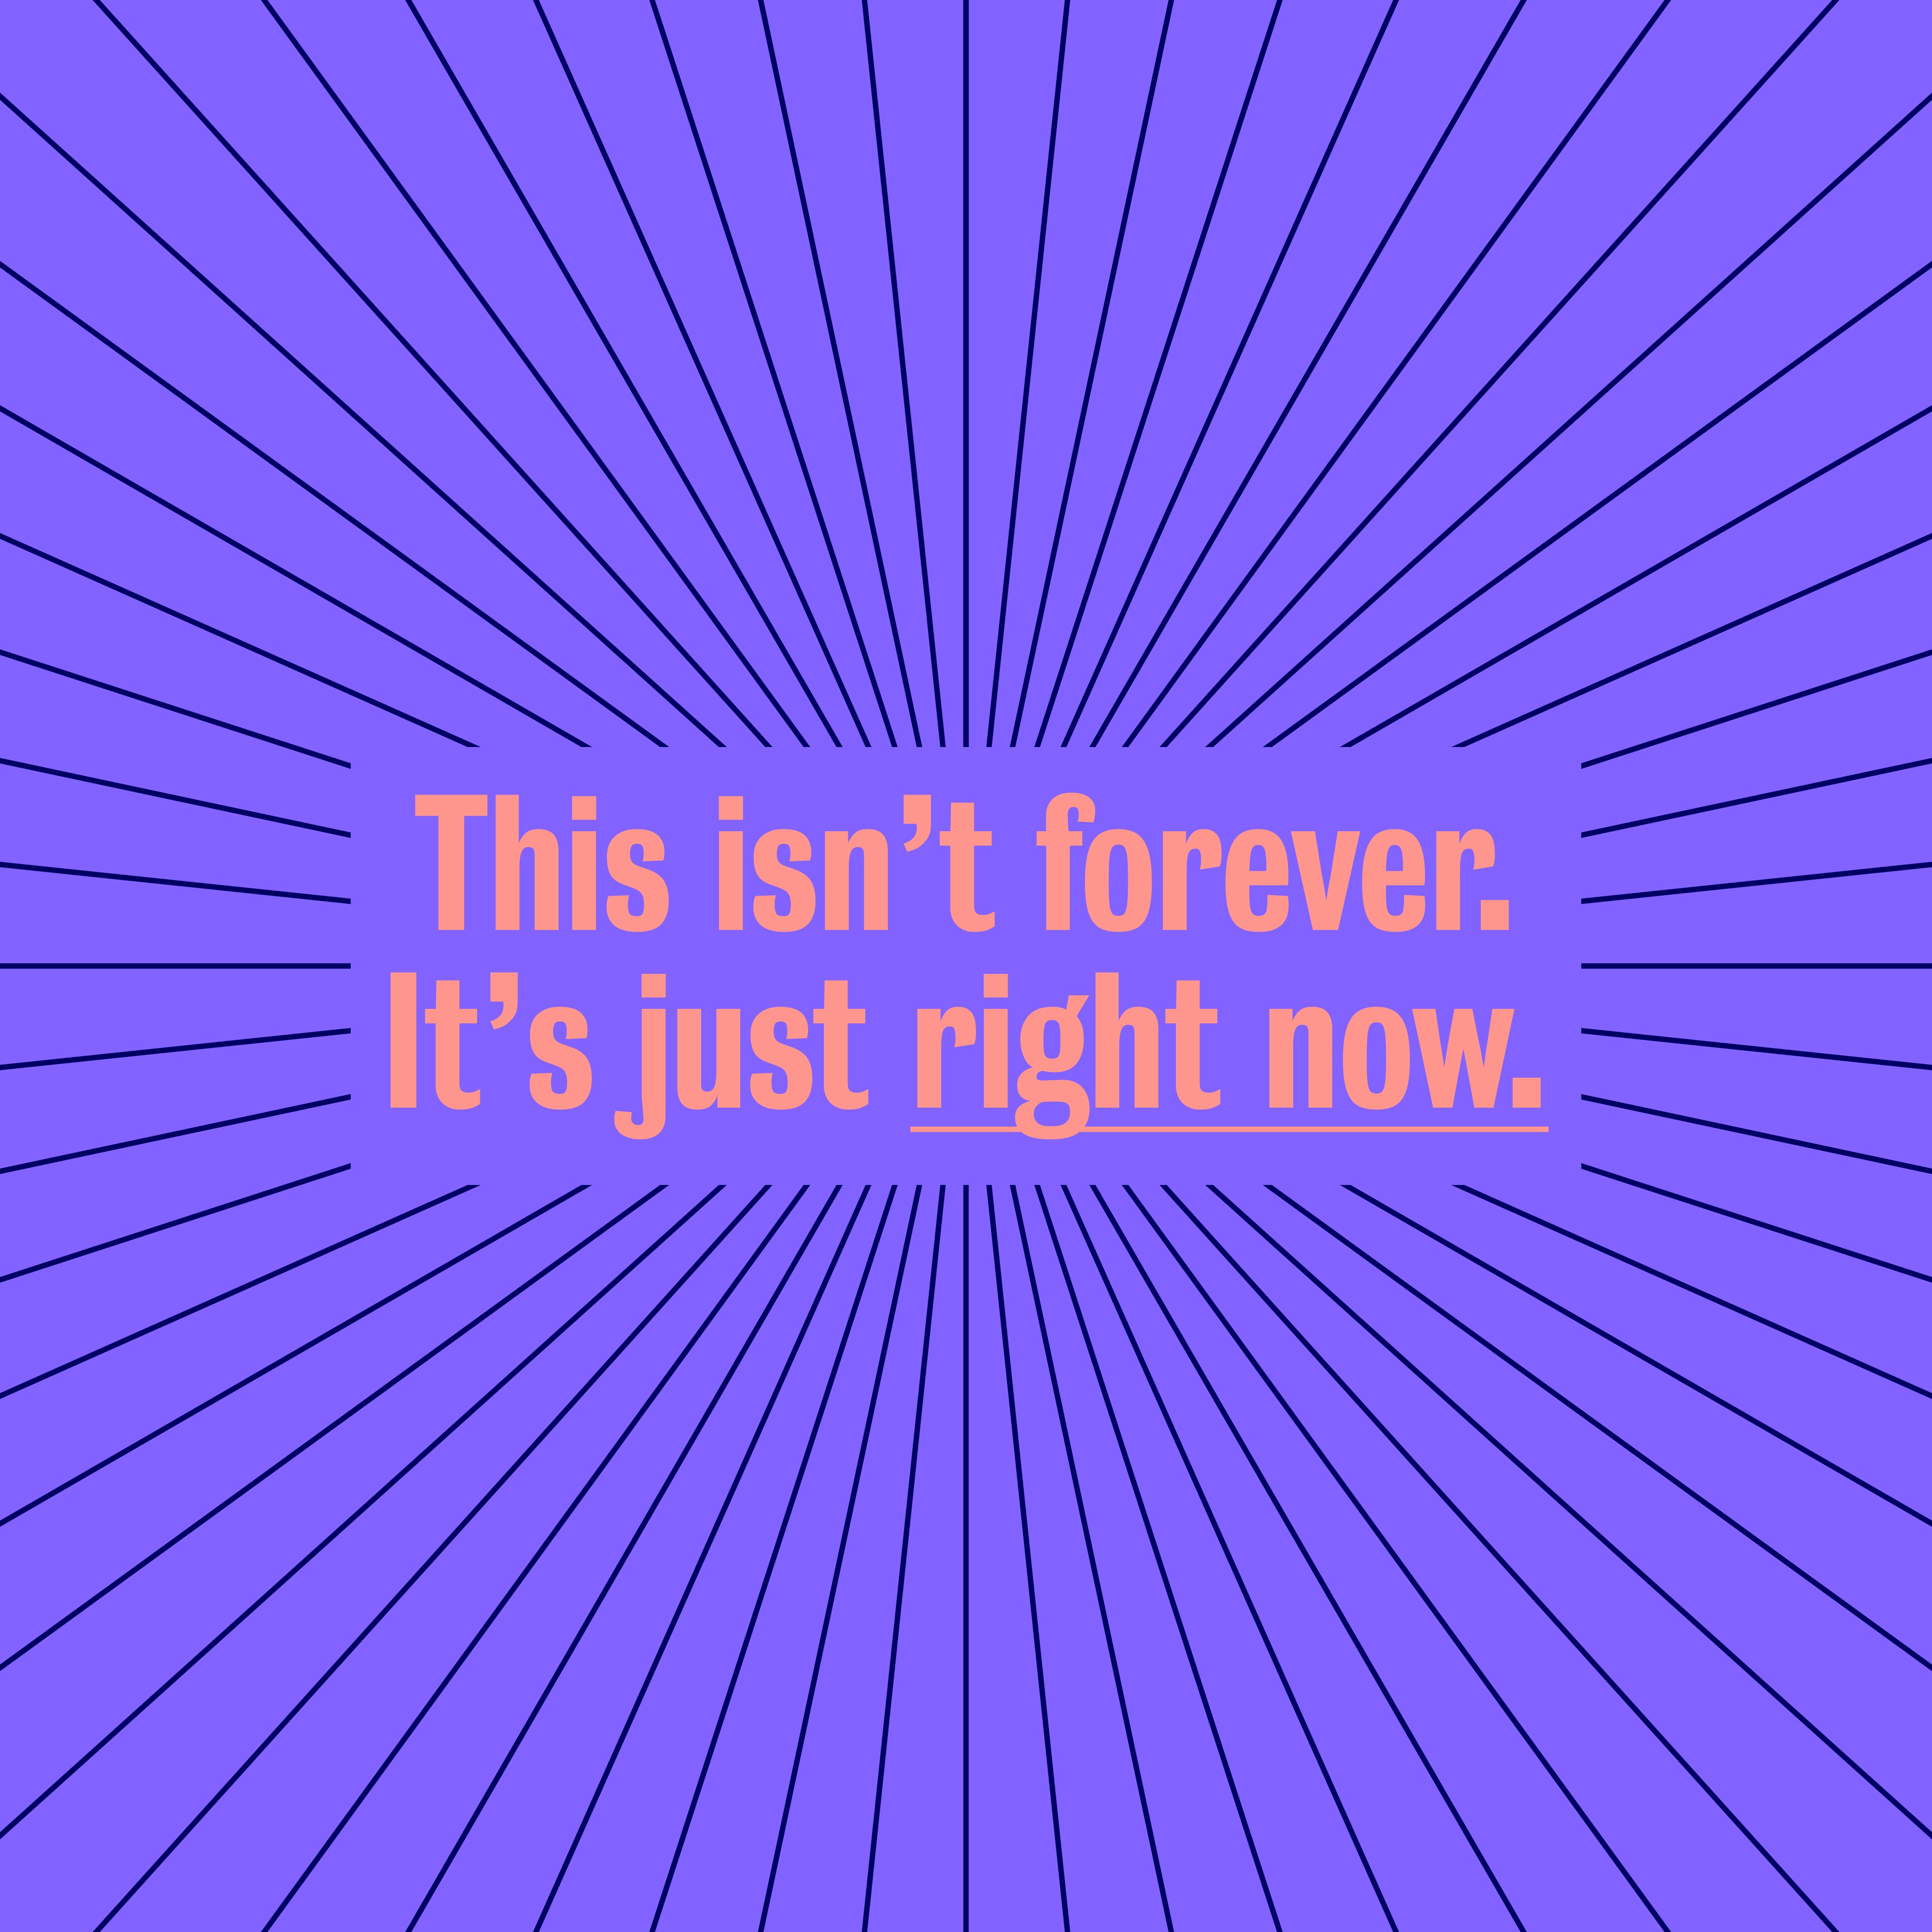 Image reads "This isn't forever, just right now"